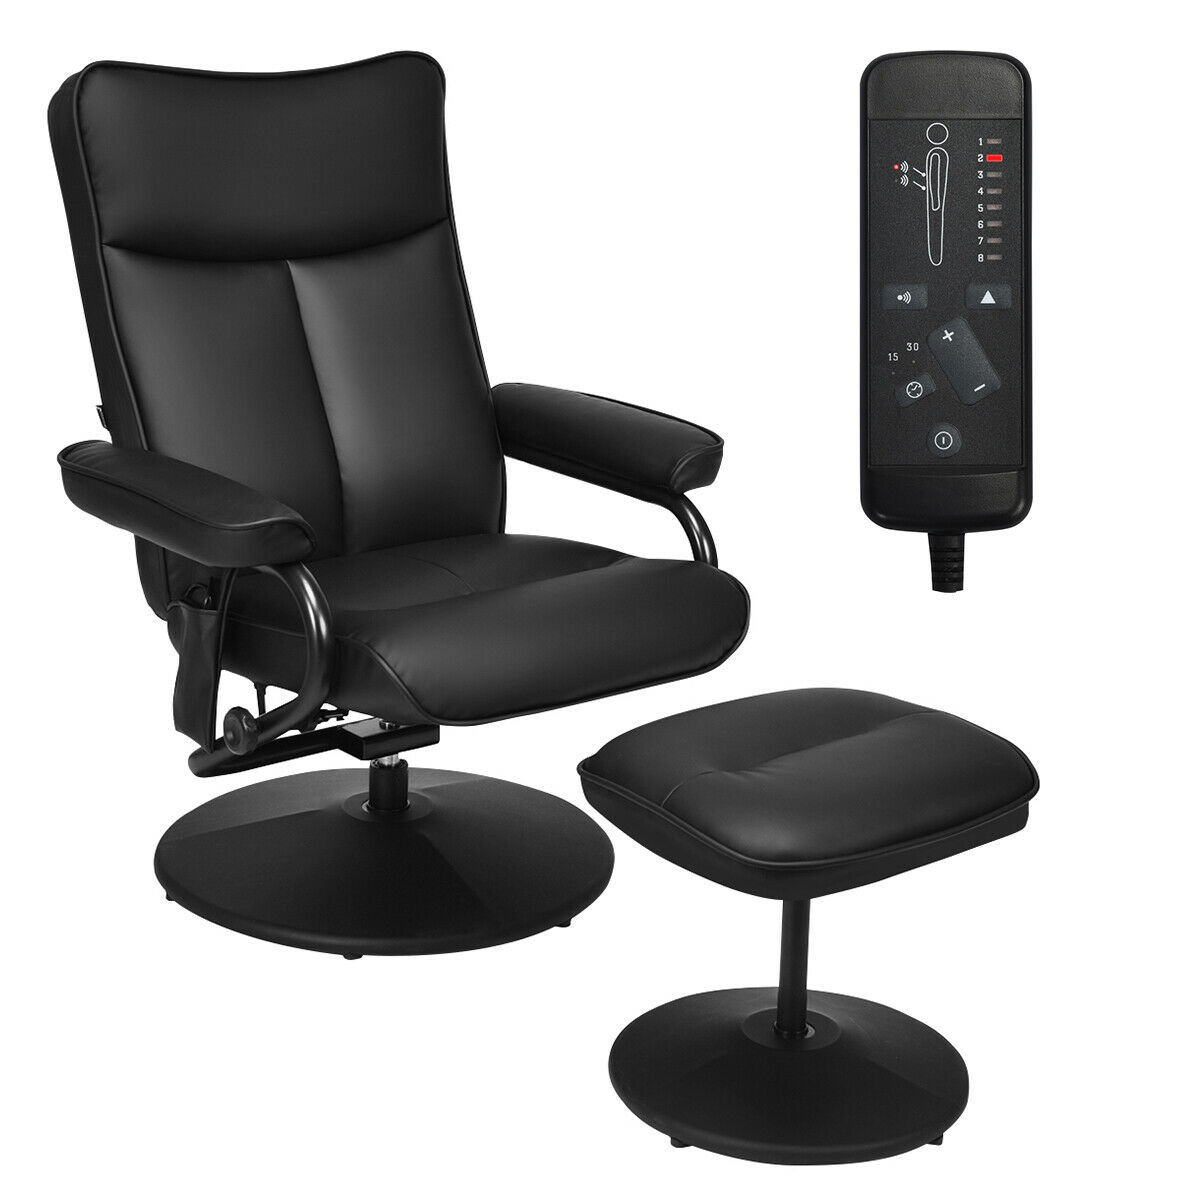 Couch Chair Lounge Swivel Massage Recliner W/ Side Pocket Remote Control Ottoman